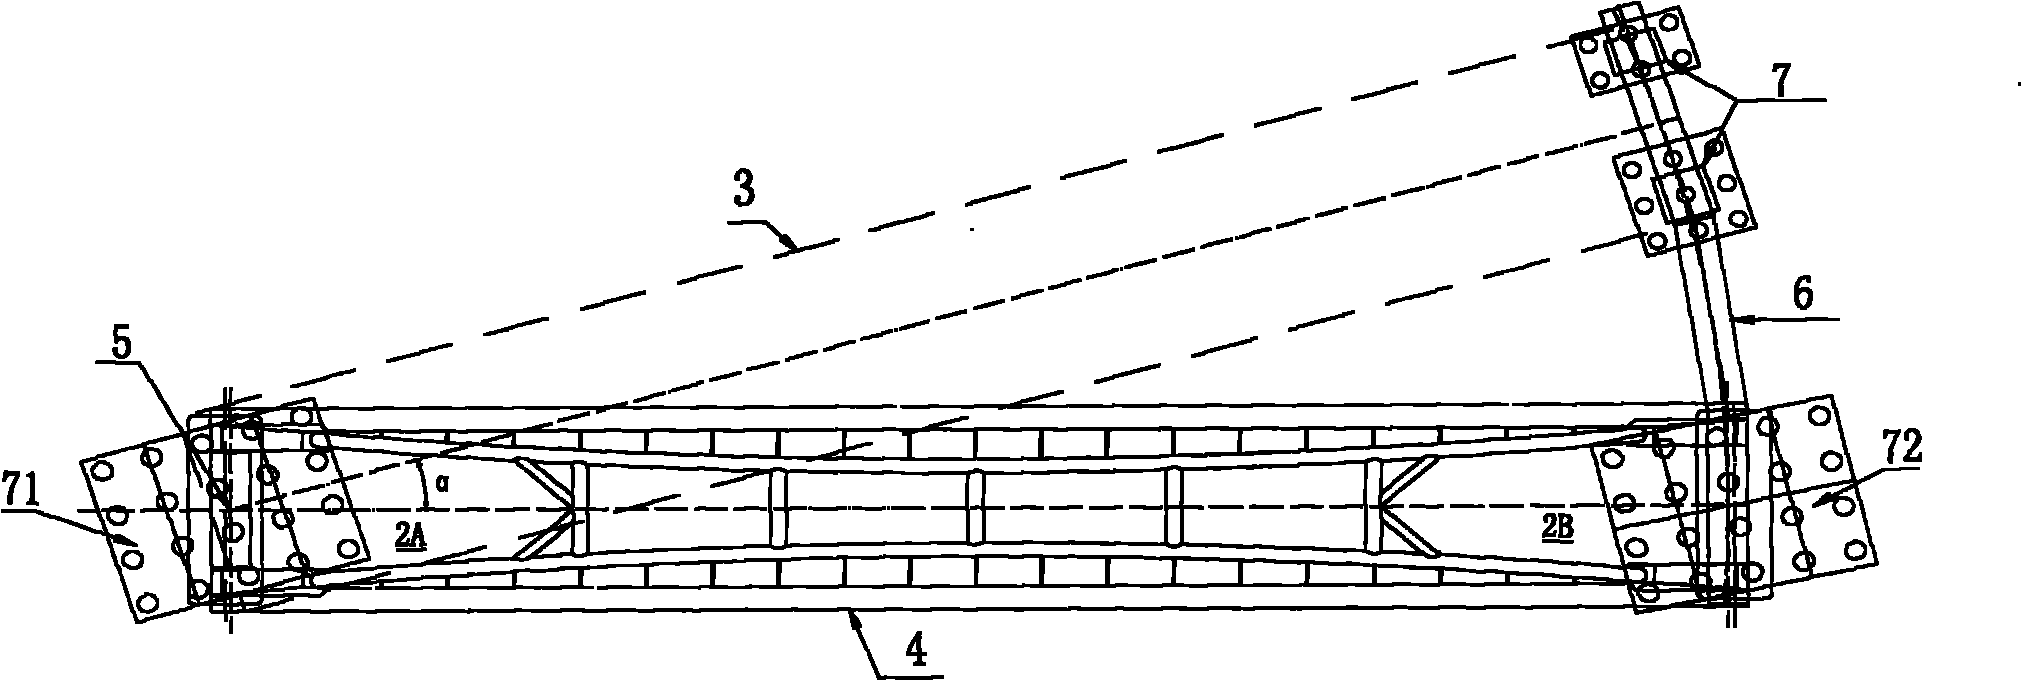 Simply supported structure bridge horizontal swivel construction system and method